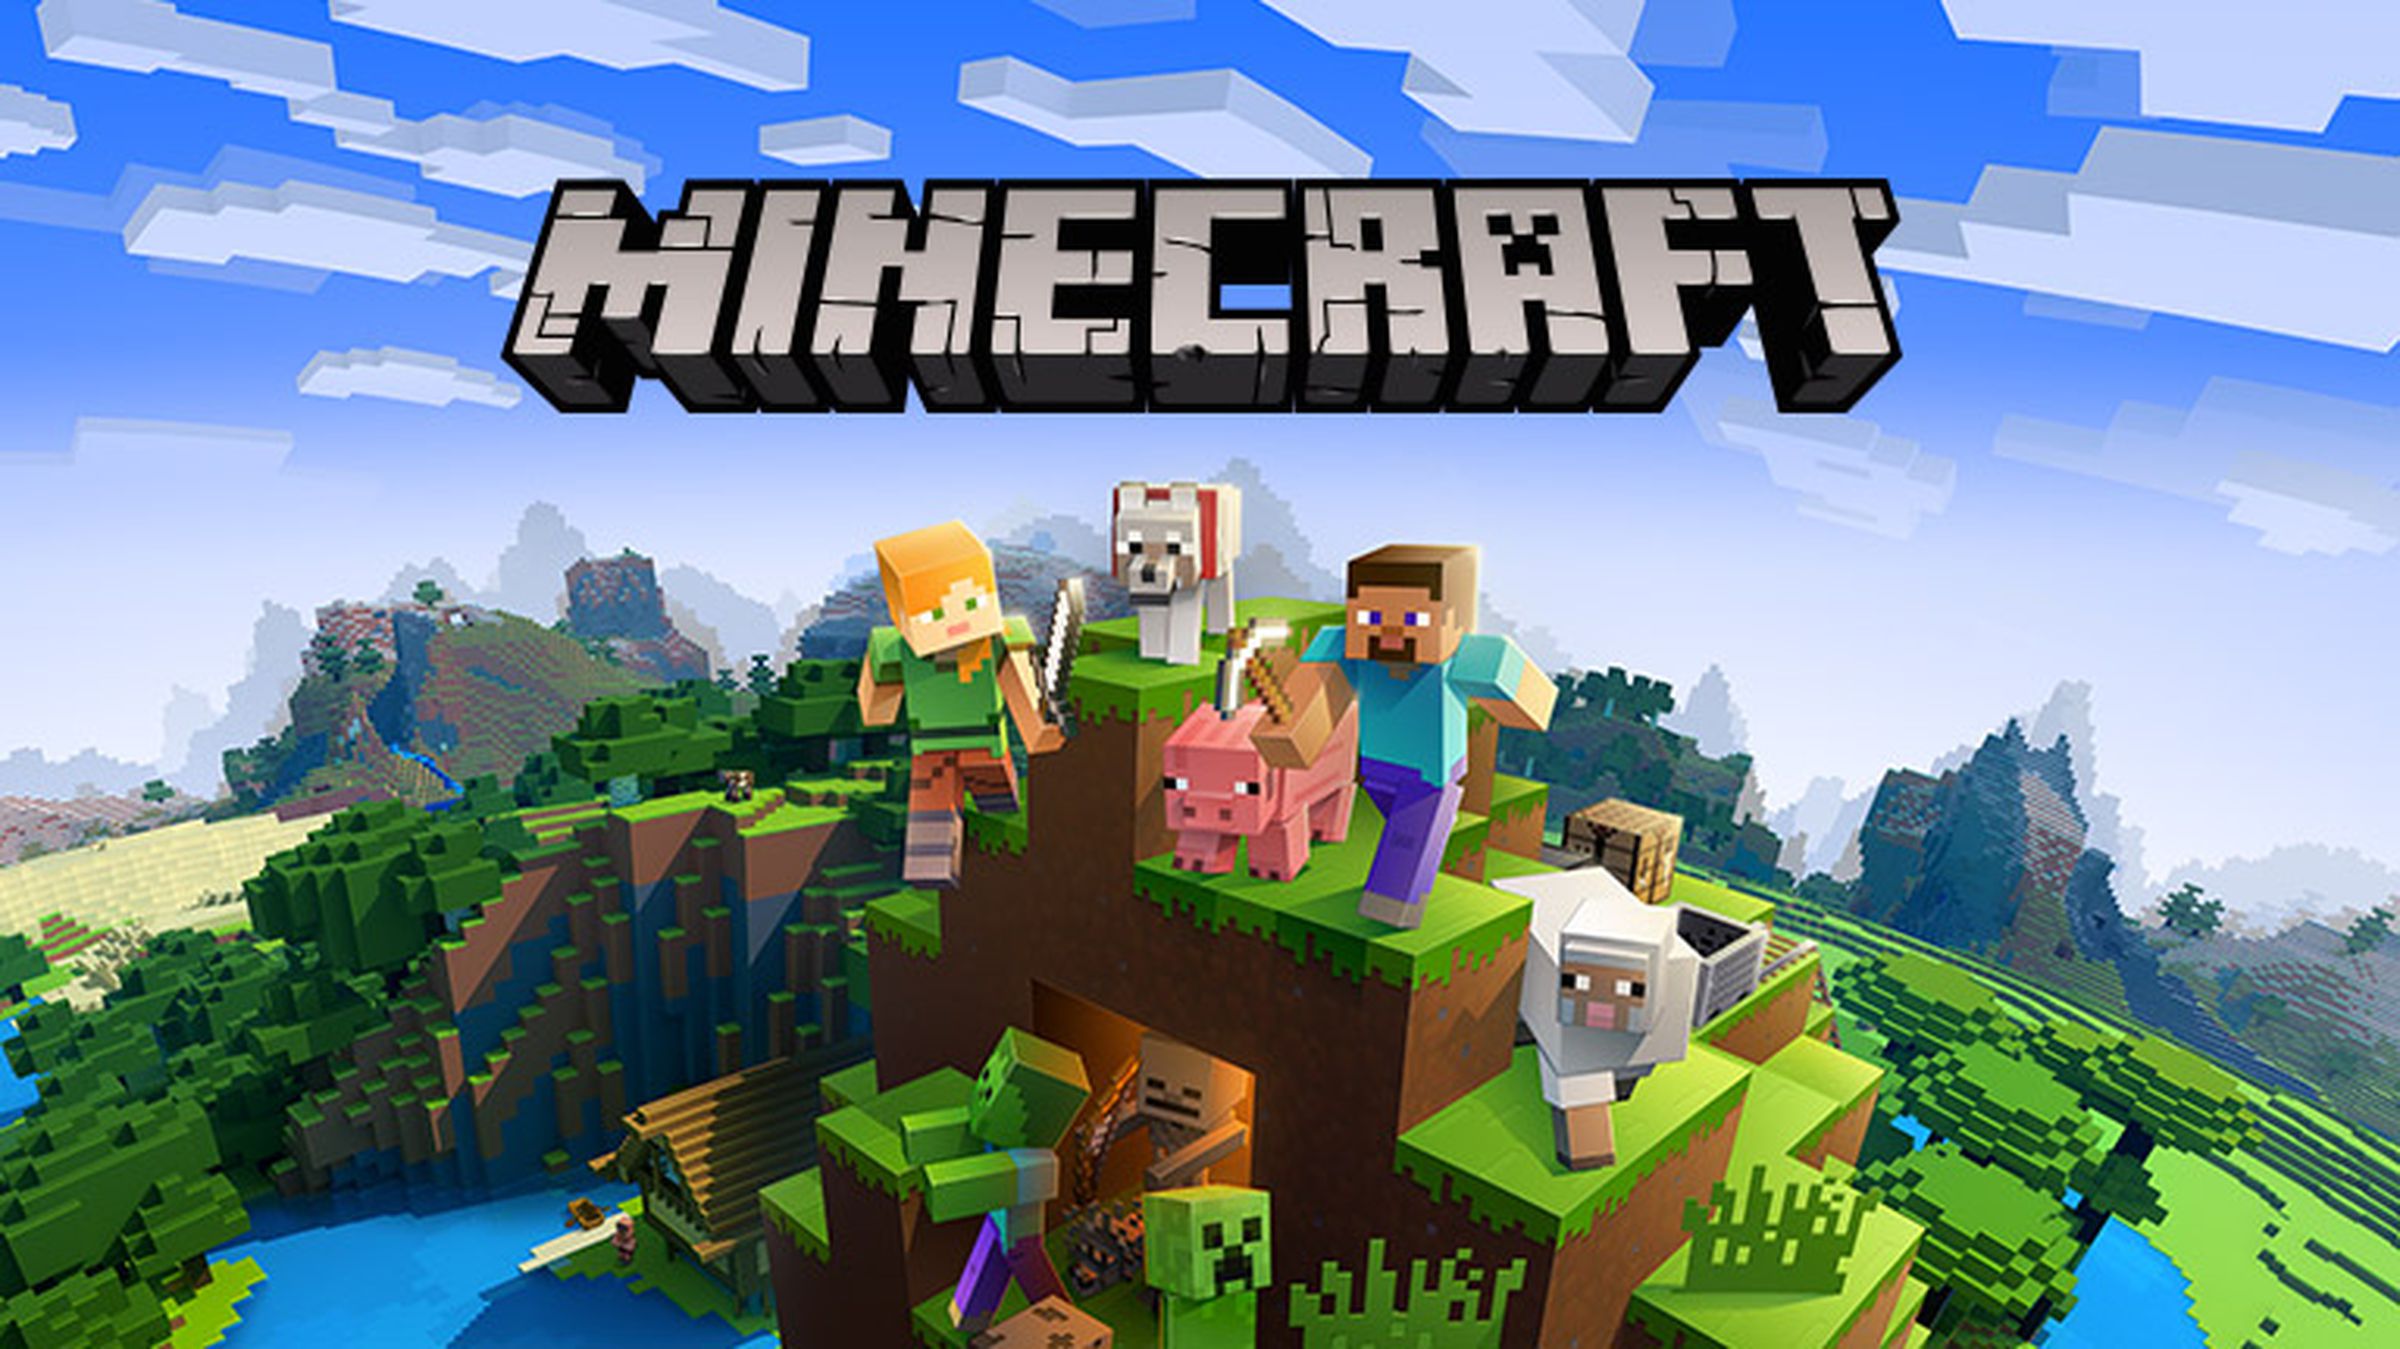 Minecraft has been a successful acquisition for Microsoft.